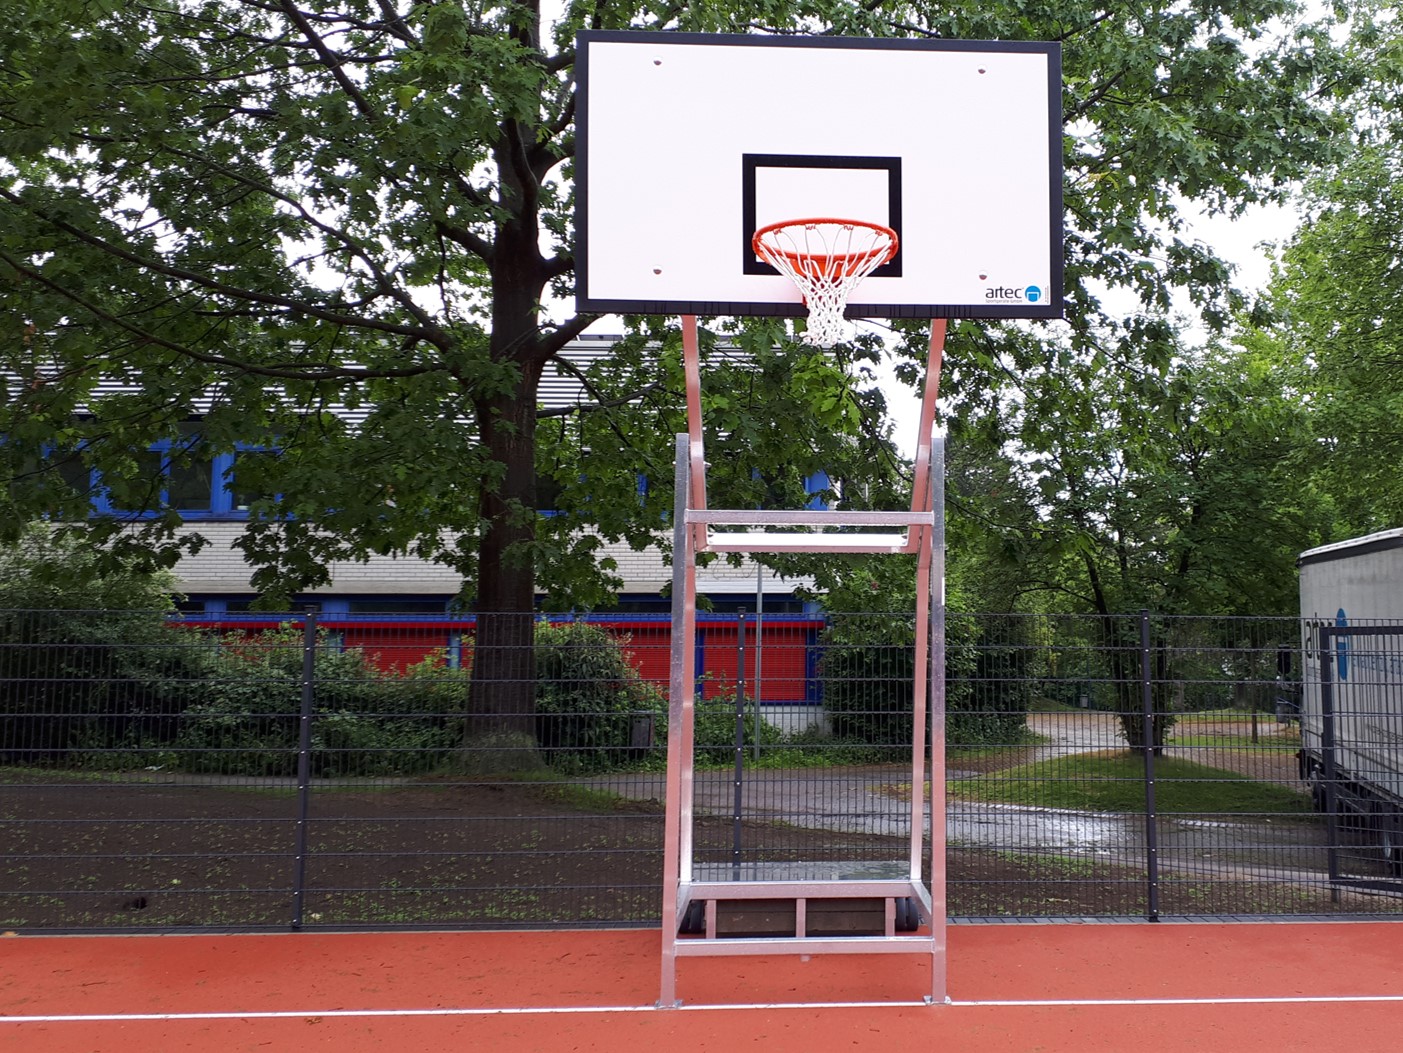 Mobile basketball system made of aluminum for outdoor use